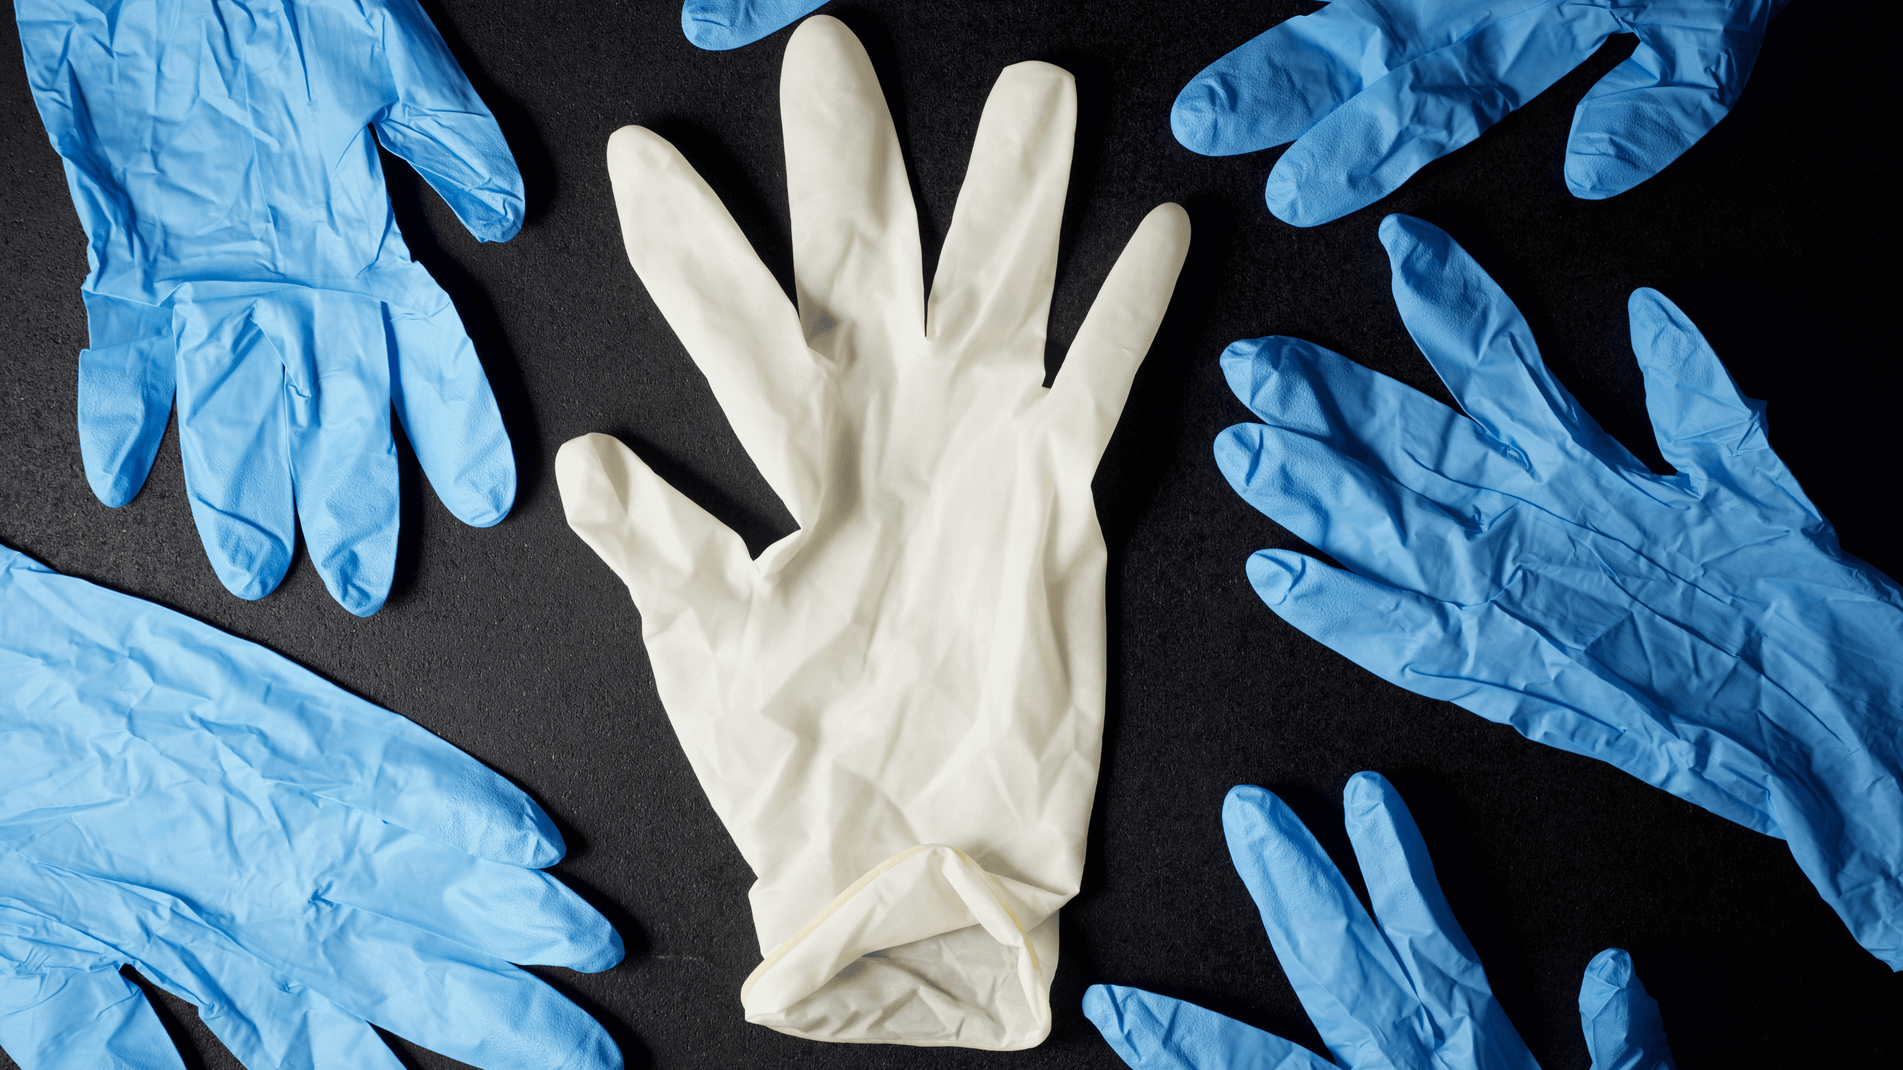 Ansell nitrile gloves stand out among the competition